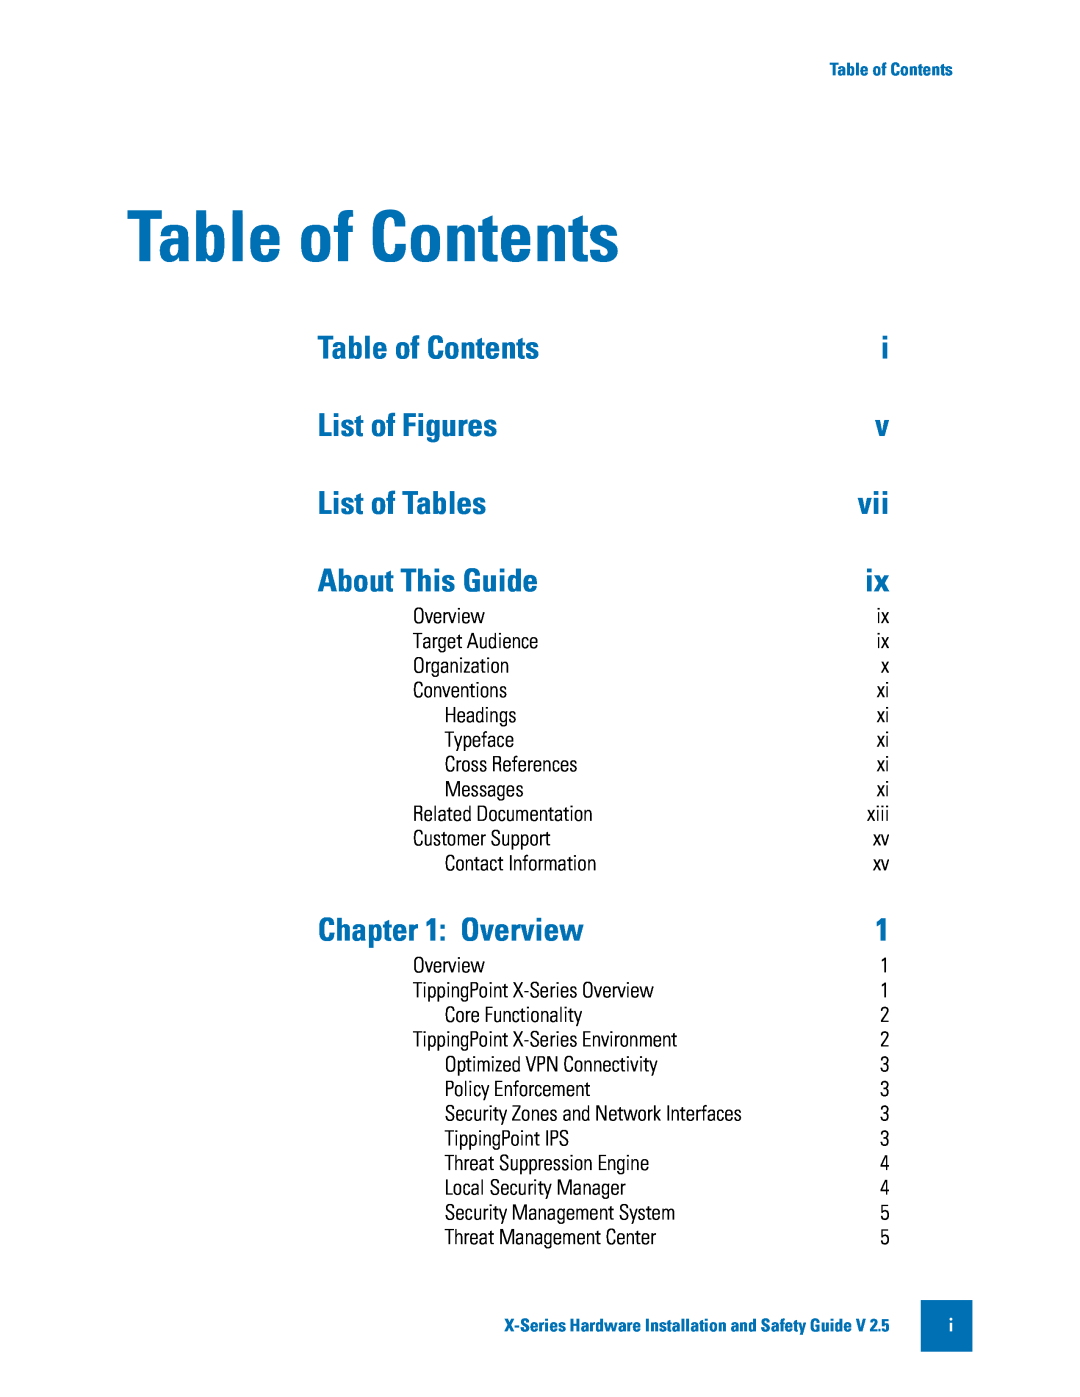 3Com TECHD-0000000122 manual Table of Contents, List of Figures, List of Tables, About This Guide, Overview 